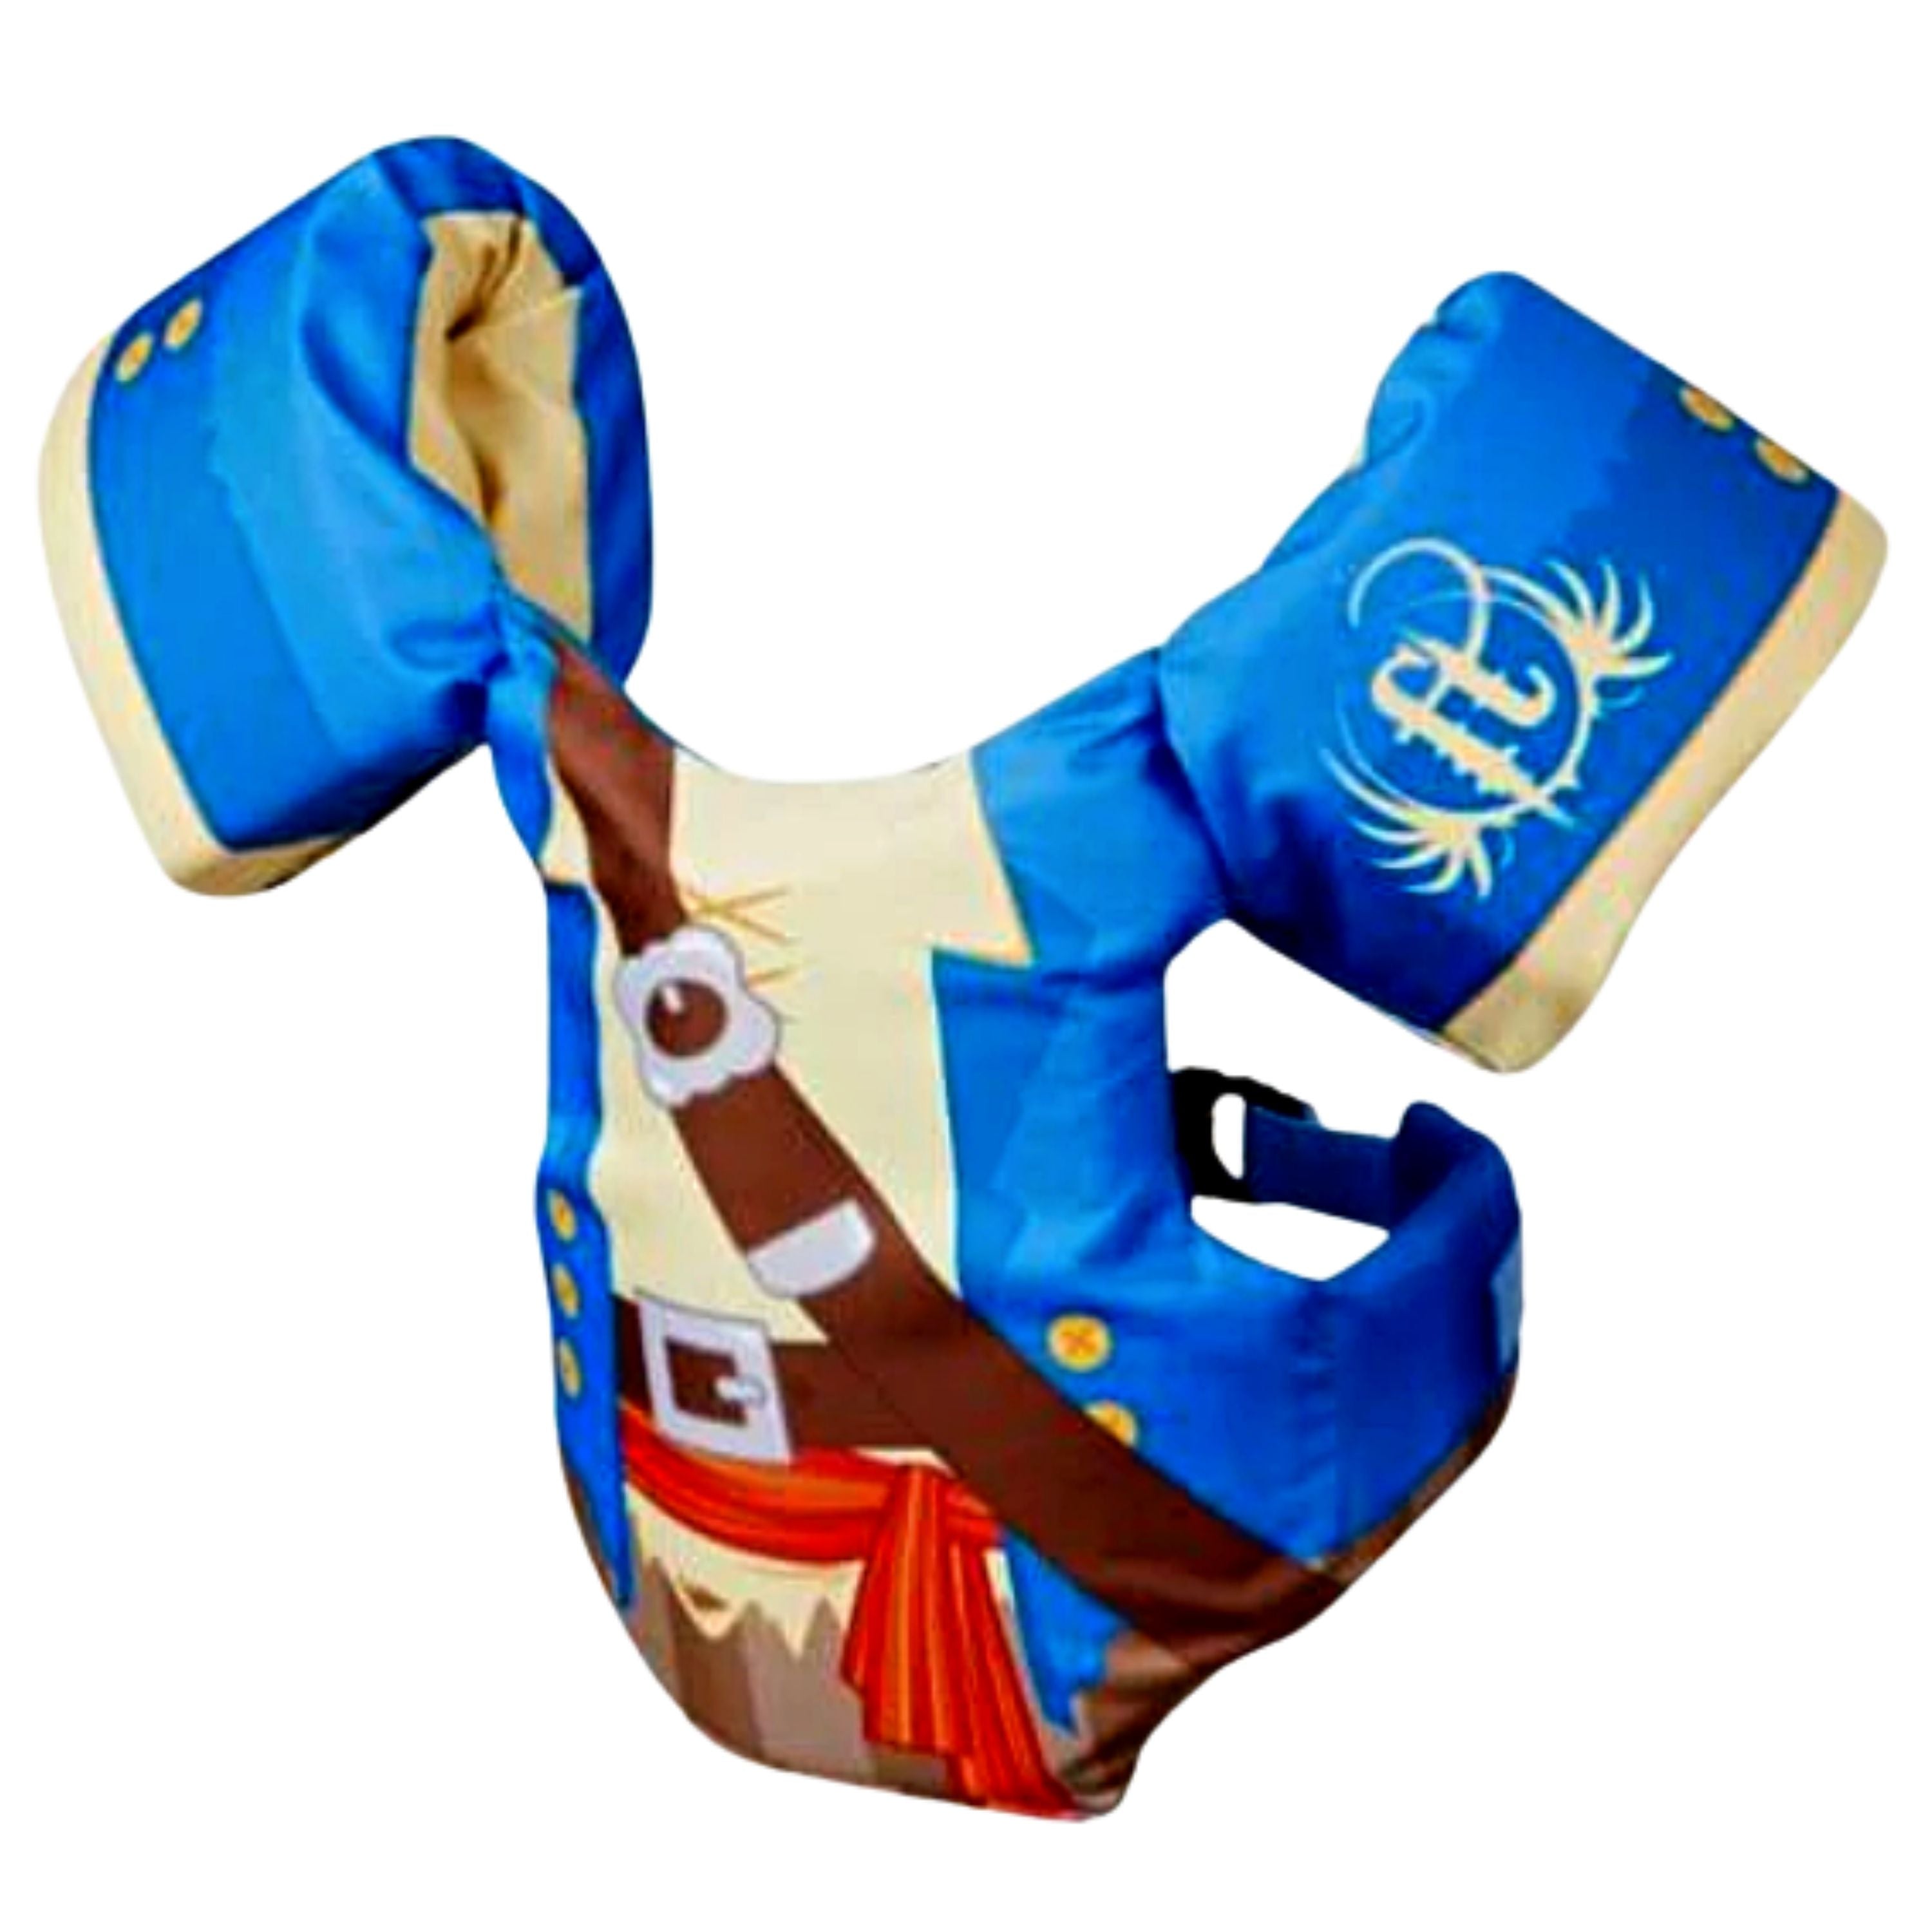 “Little dippers” life jacket - Pirate